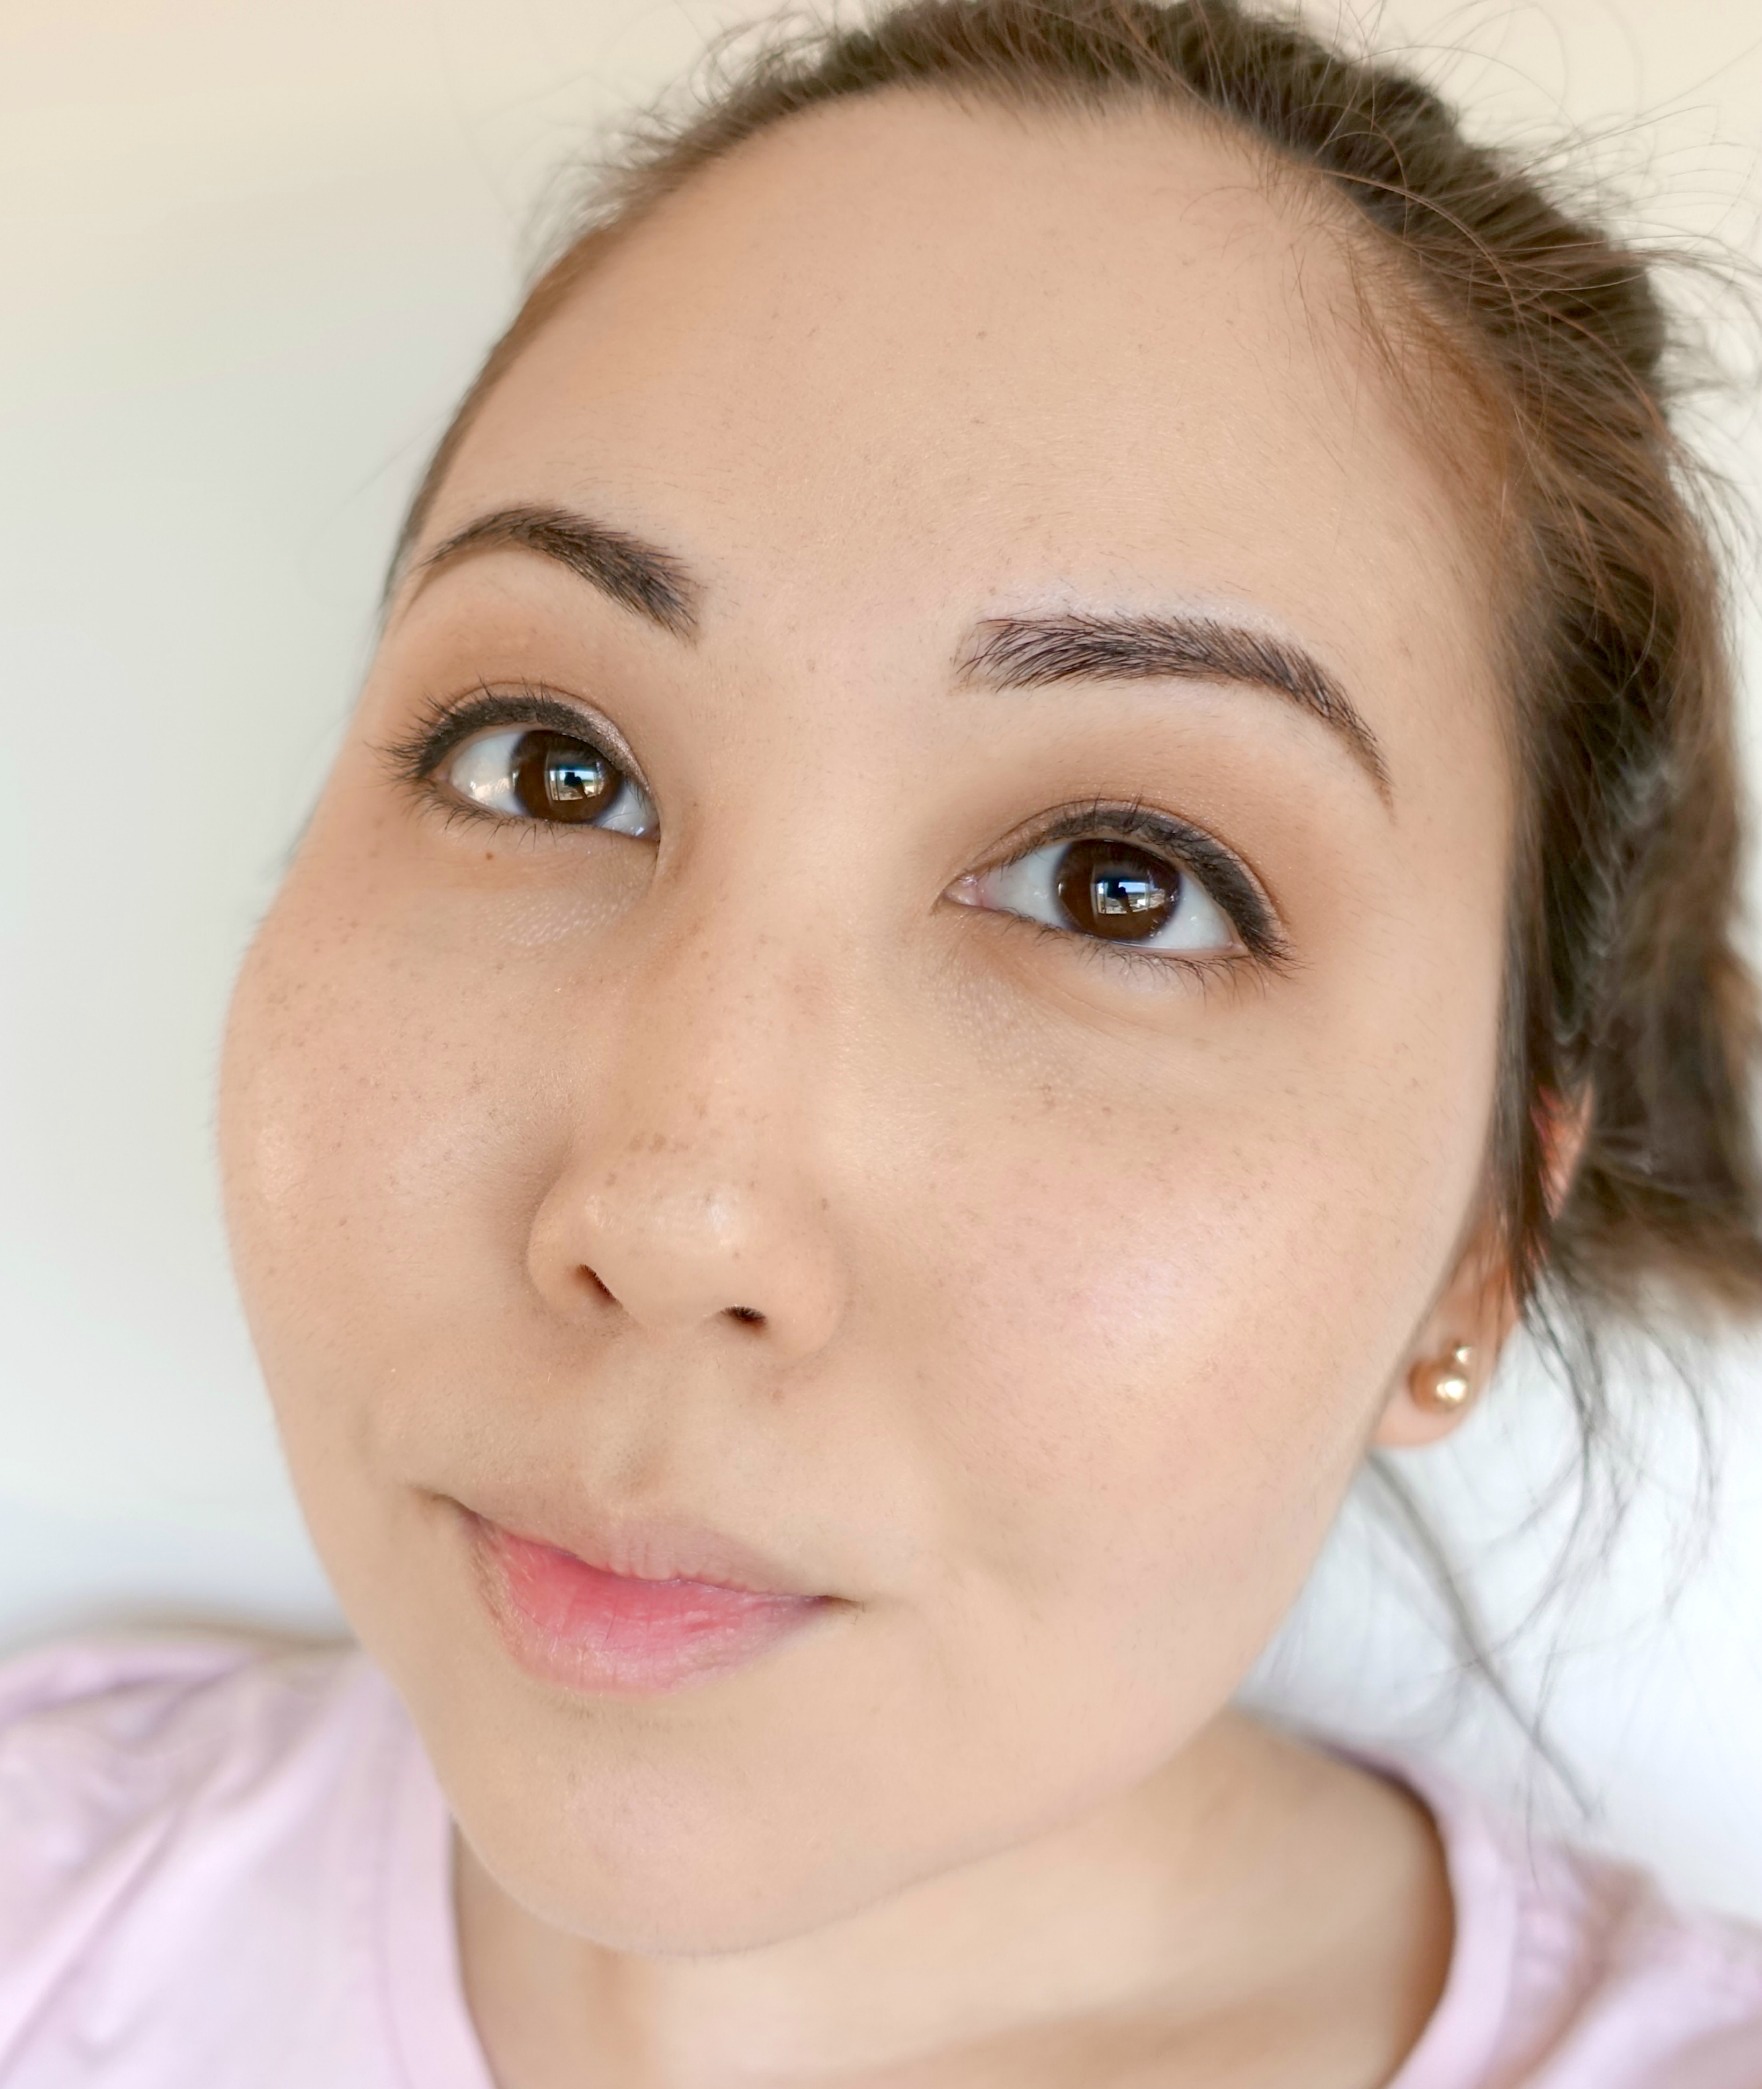 MAKEUP FOREVER ULTRA HD FOUNDATION: A REVIEW